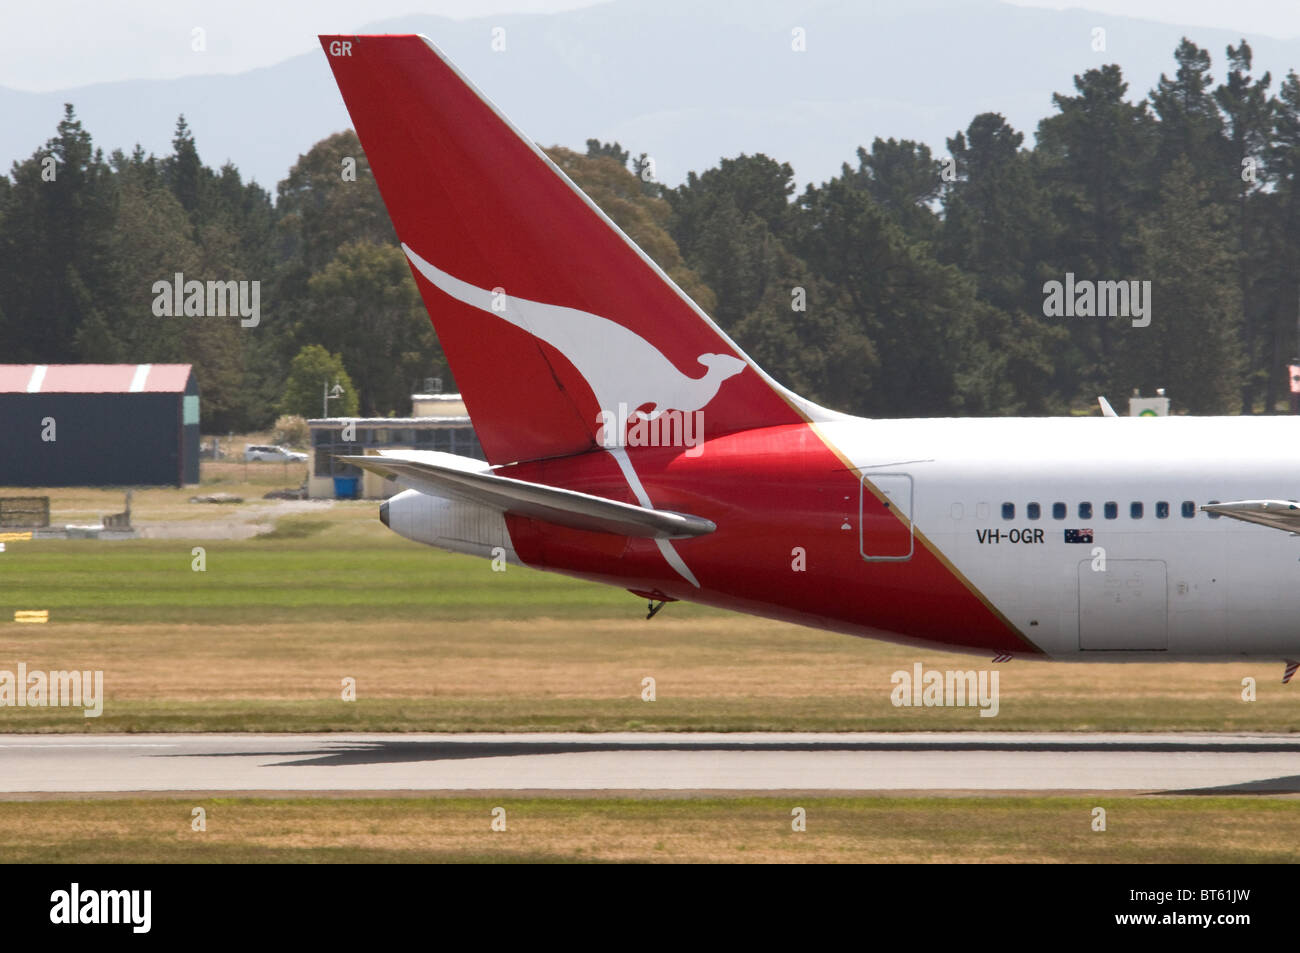 australian airline tail logo insignia kangaroo 330, 737, 767, a330, air, airbus, aircraft, airliner, airplane, airport, apron, a Stock Photo